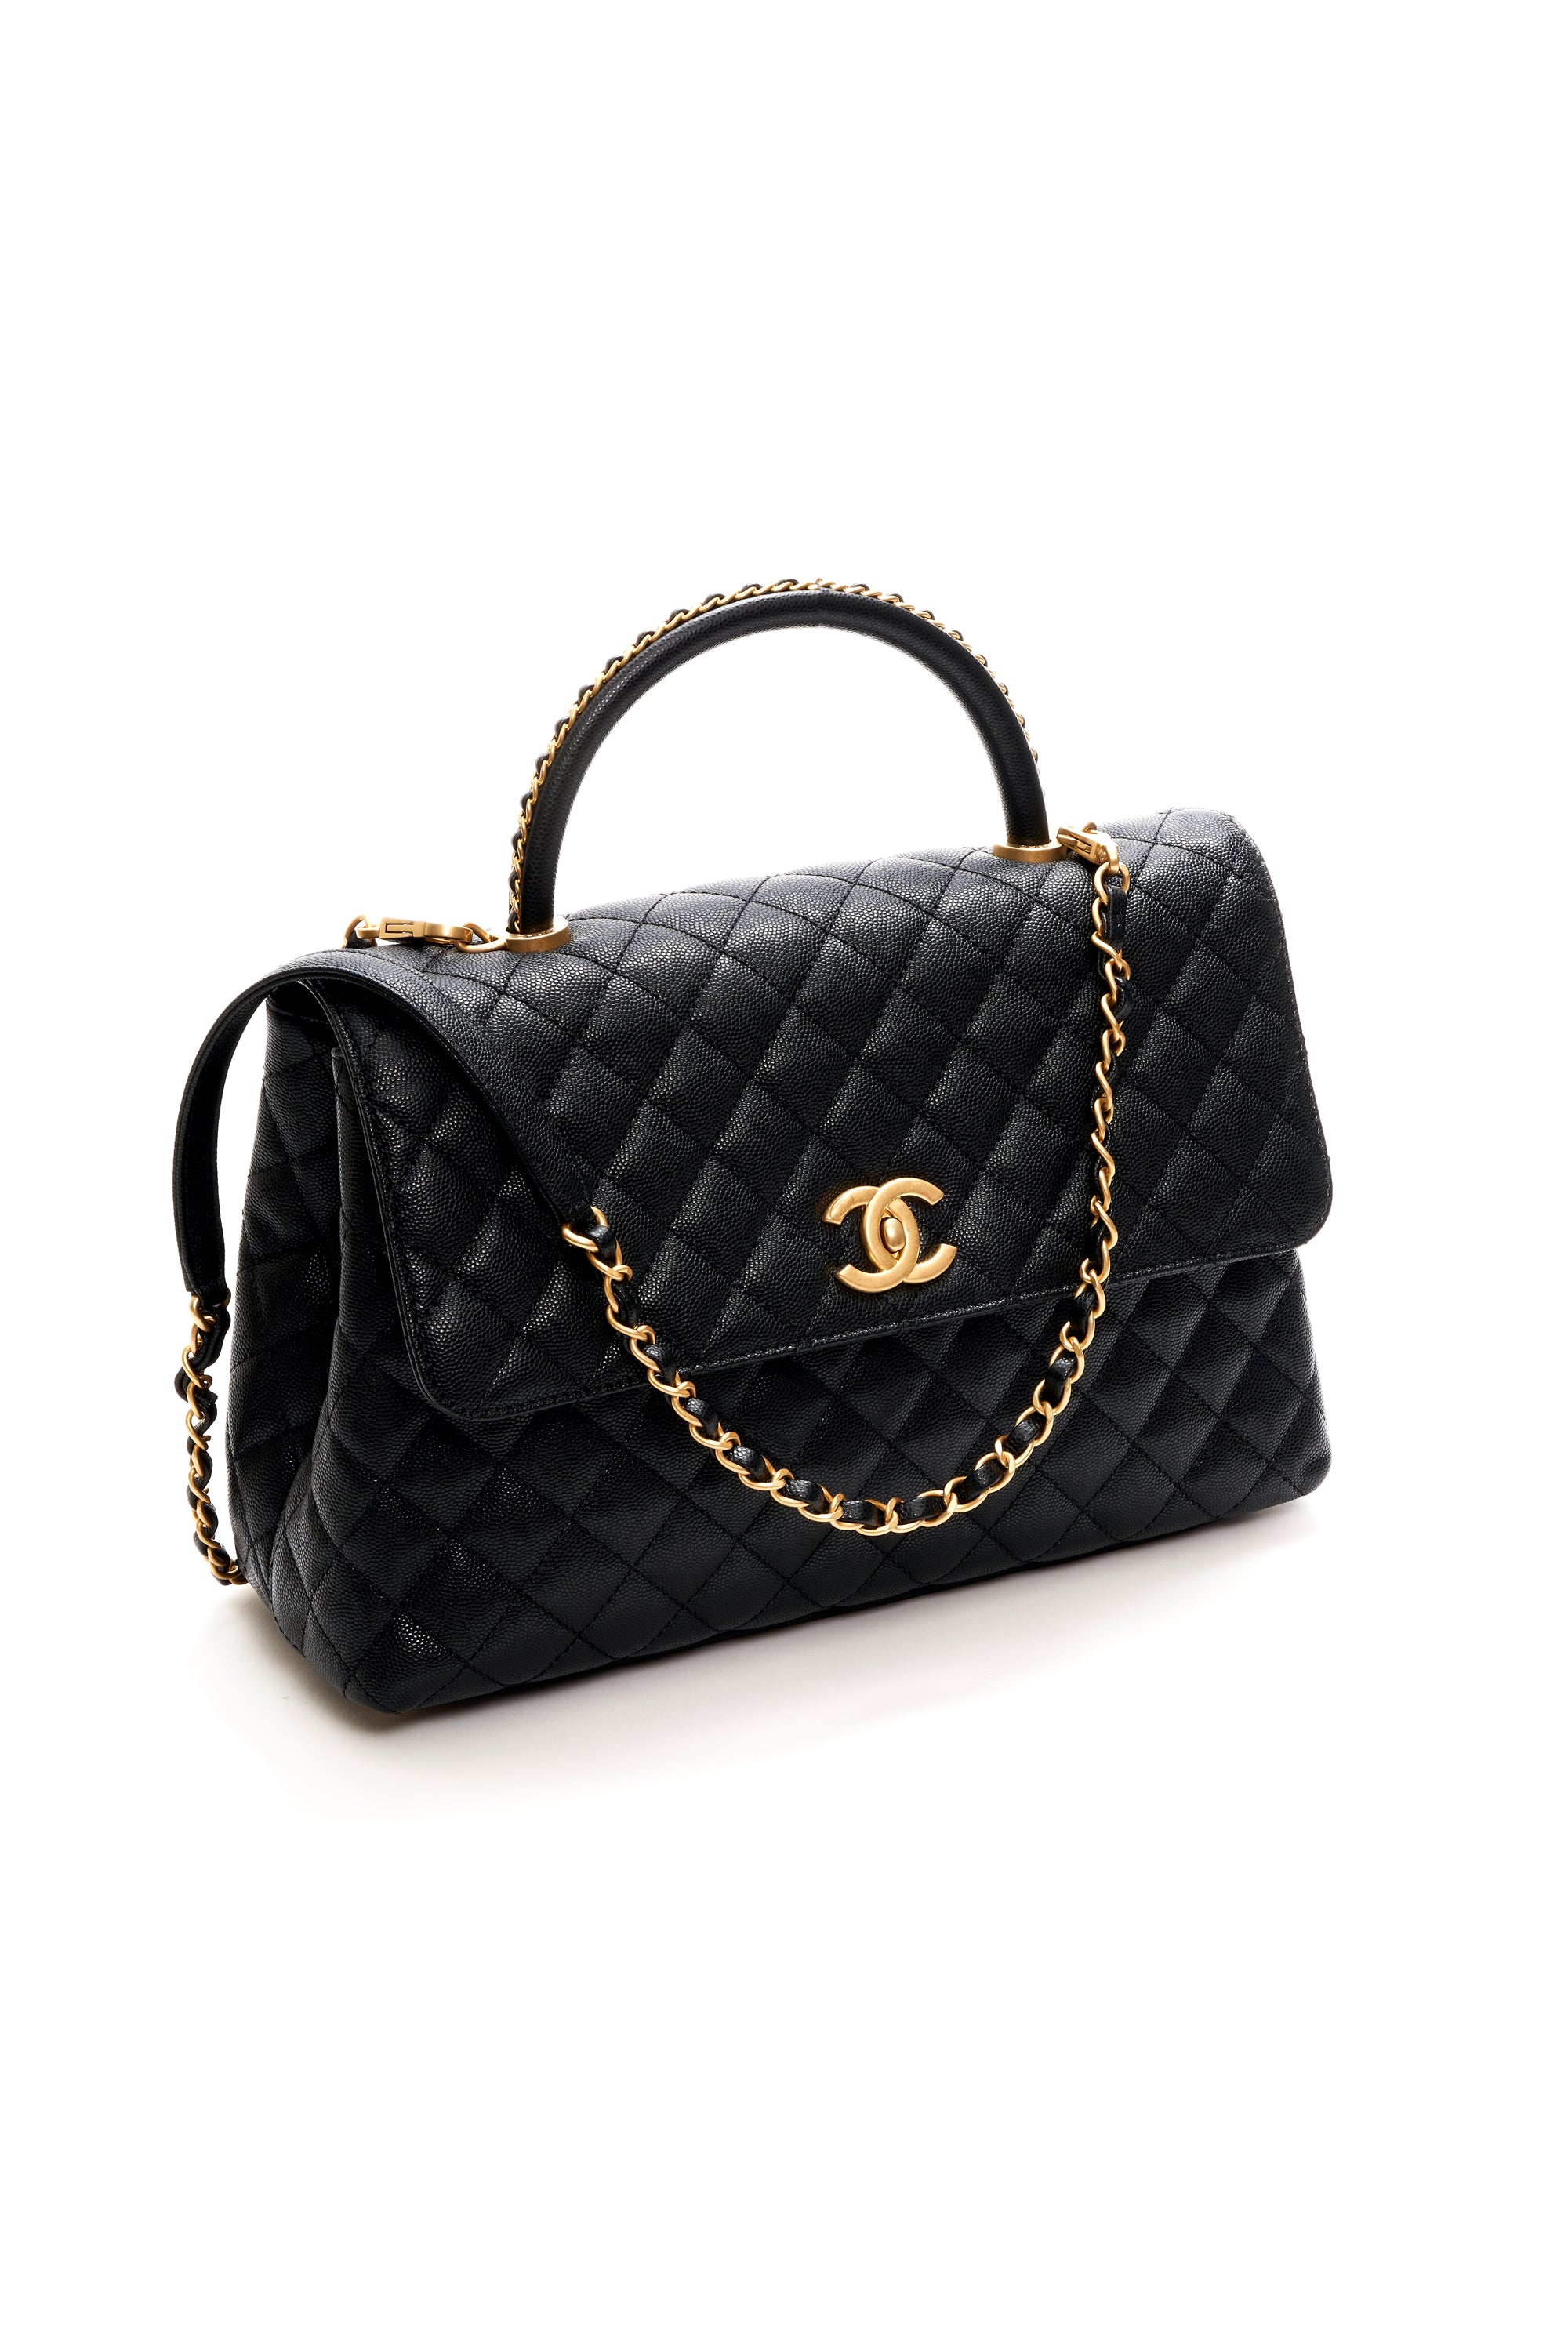 Chanel Black Caviar flap Bag Chain and Top Handle